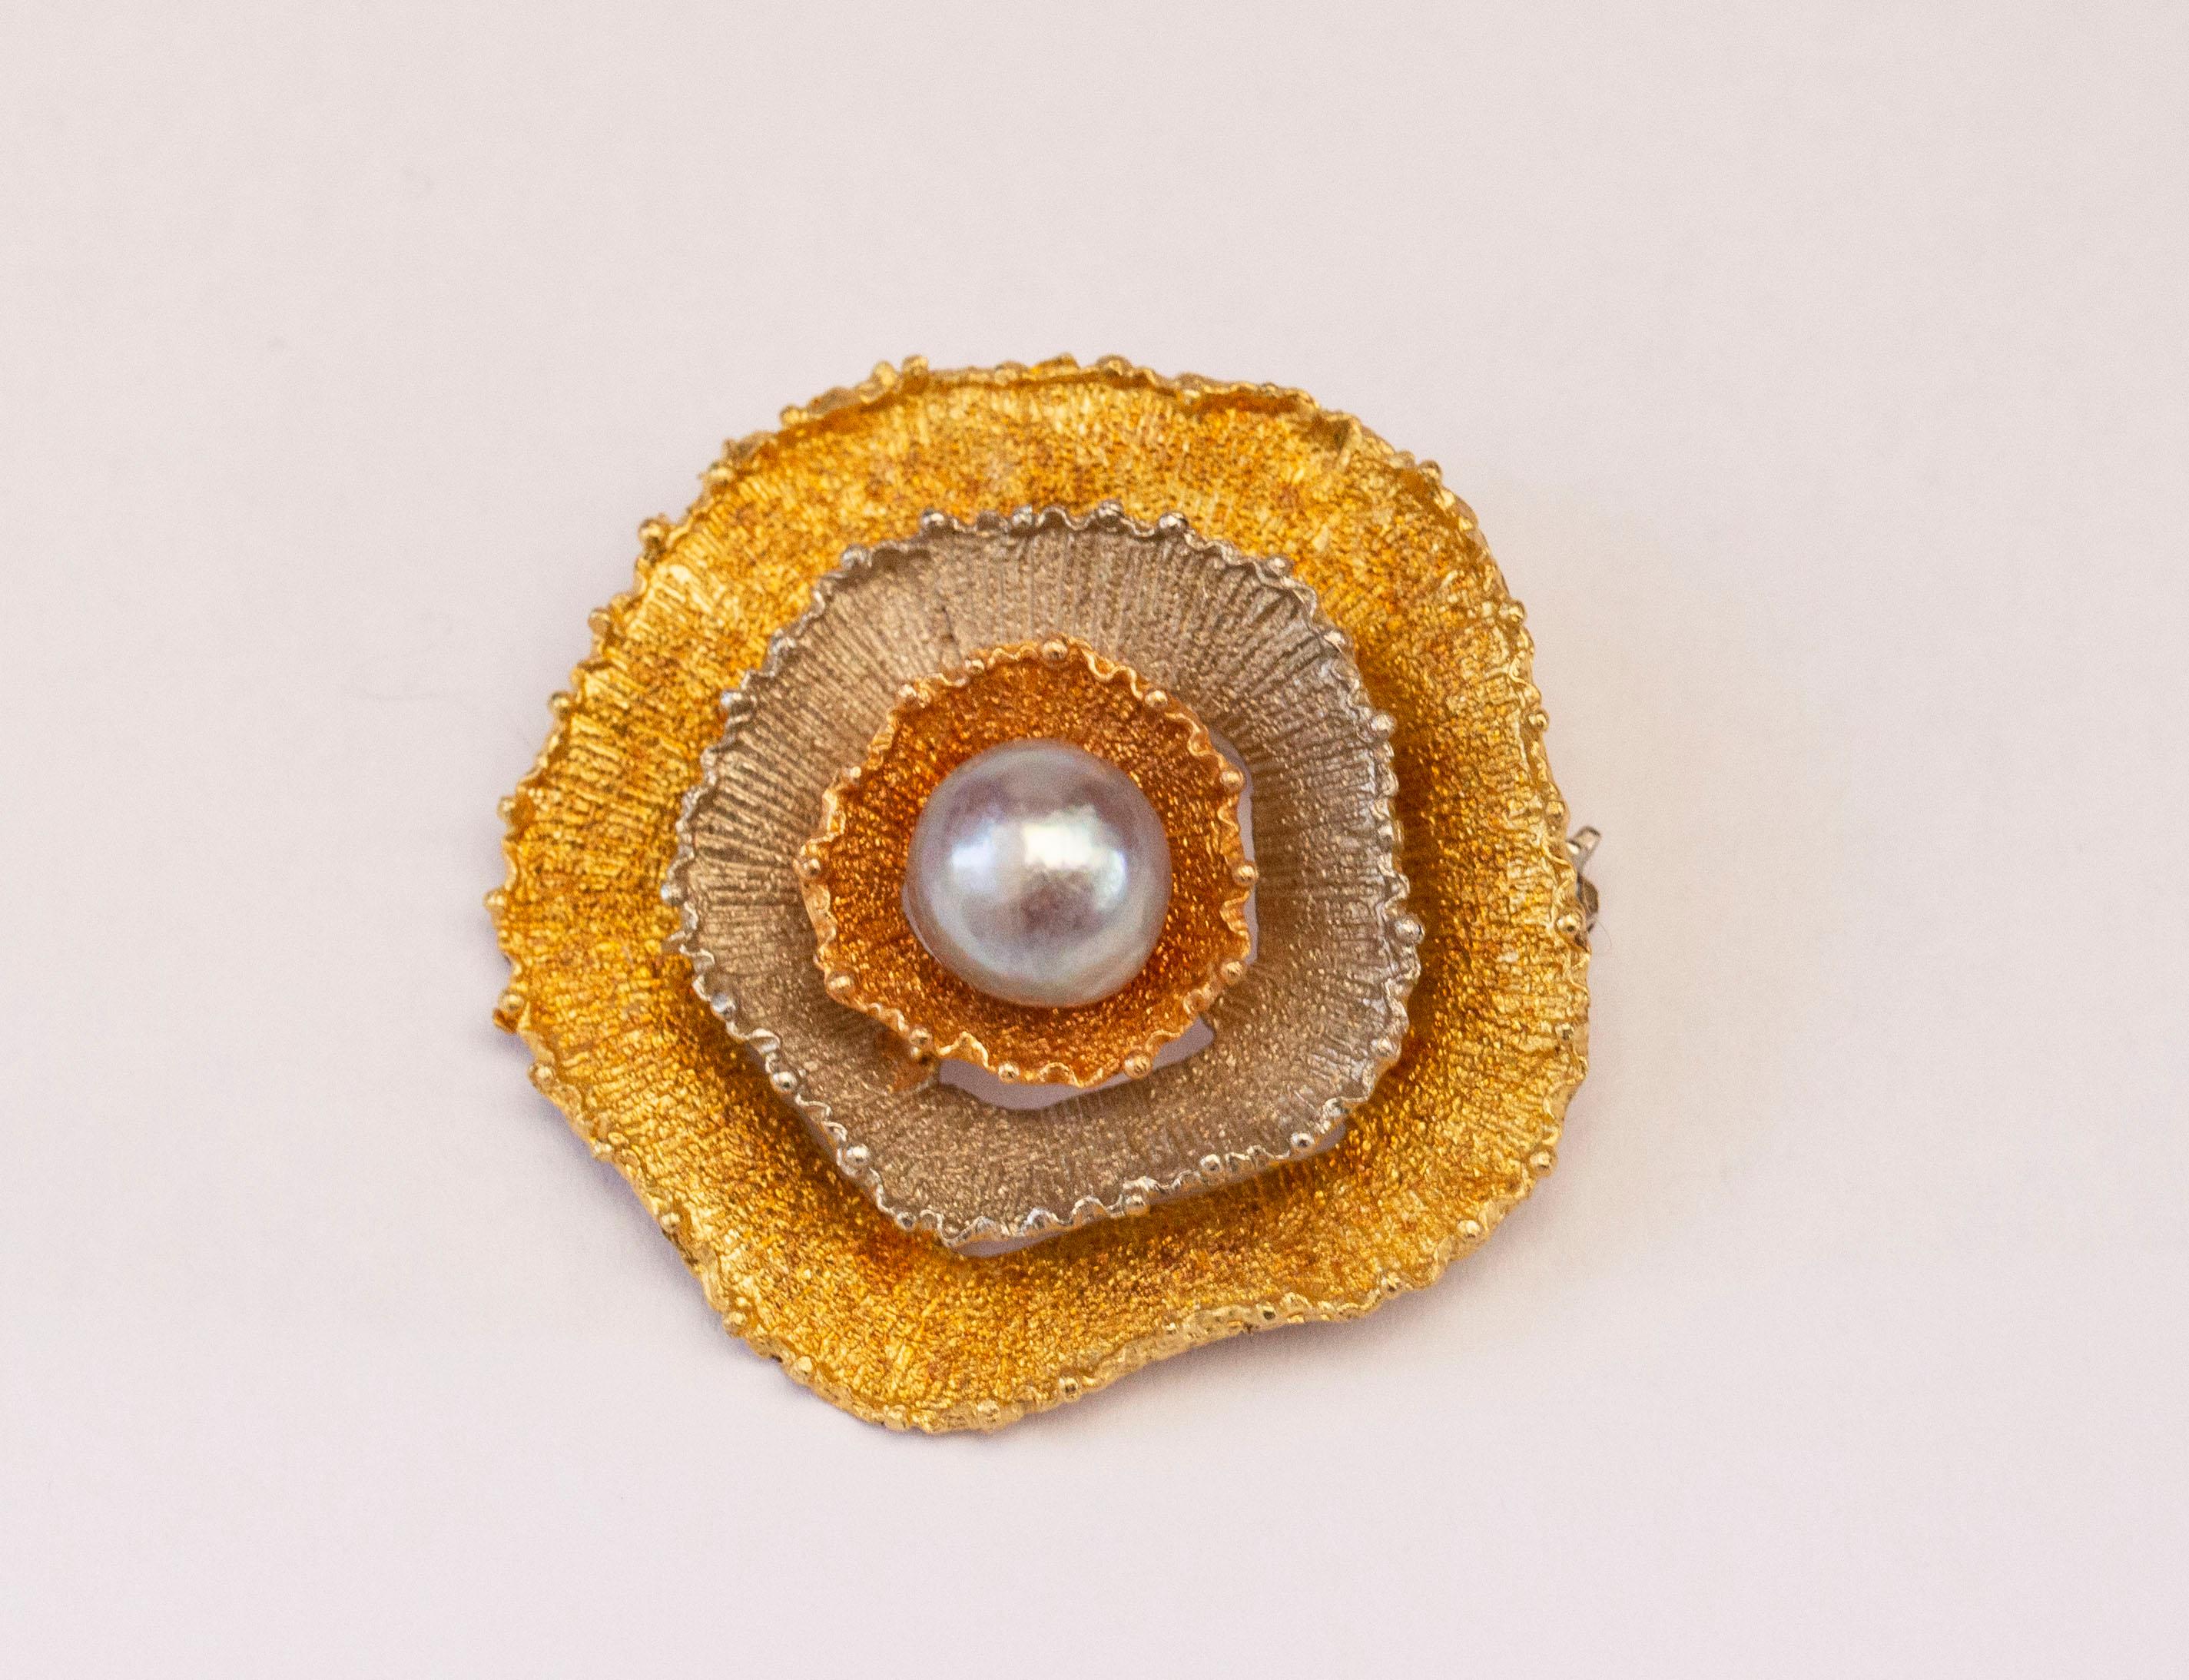 A vintage 18 karat tricolor (yellow, white & rose) gold brooch in a form of a round abstract flower with a gray pearl in the middle. The brooch features a precise and intricate finish. The brooch could be a great present idea for a woman of any age